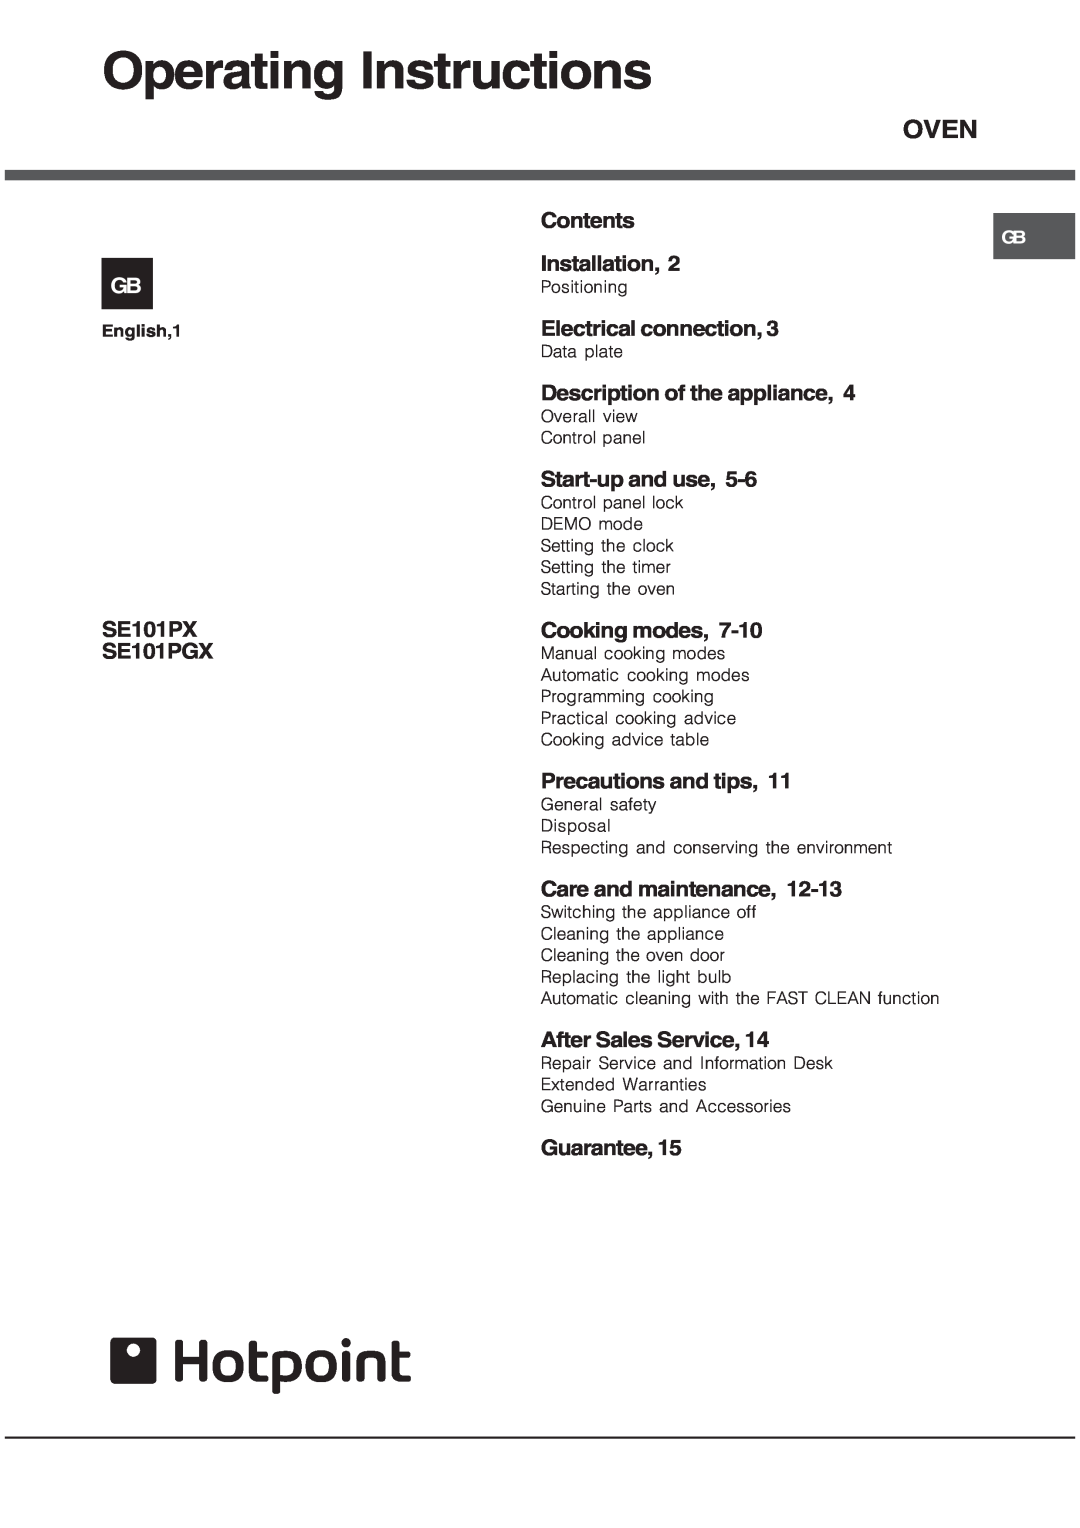 Hotpoint SE101PGX manual Operating Instructions, Oven 